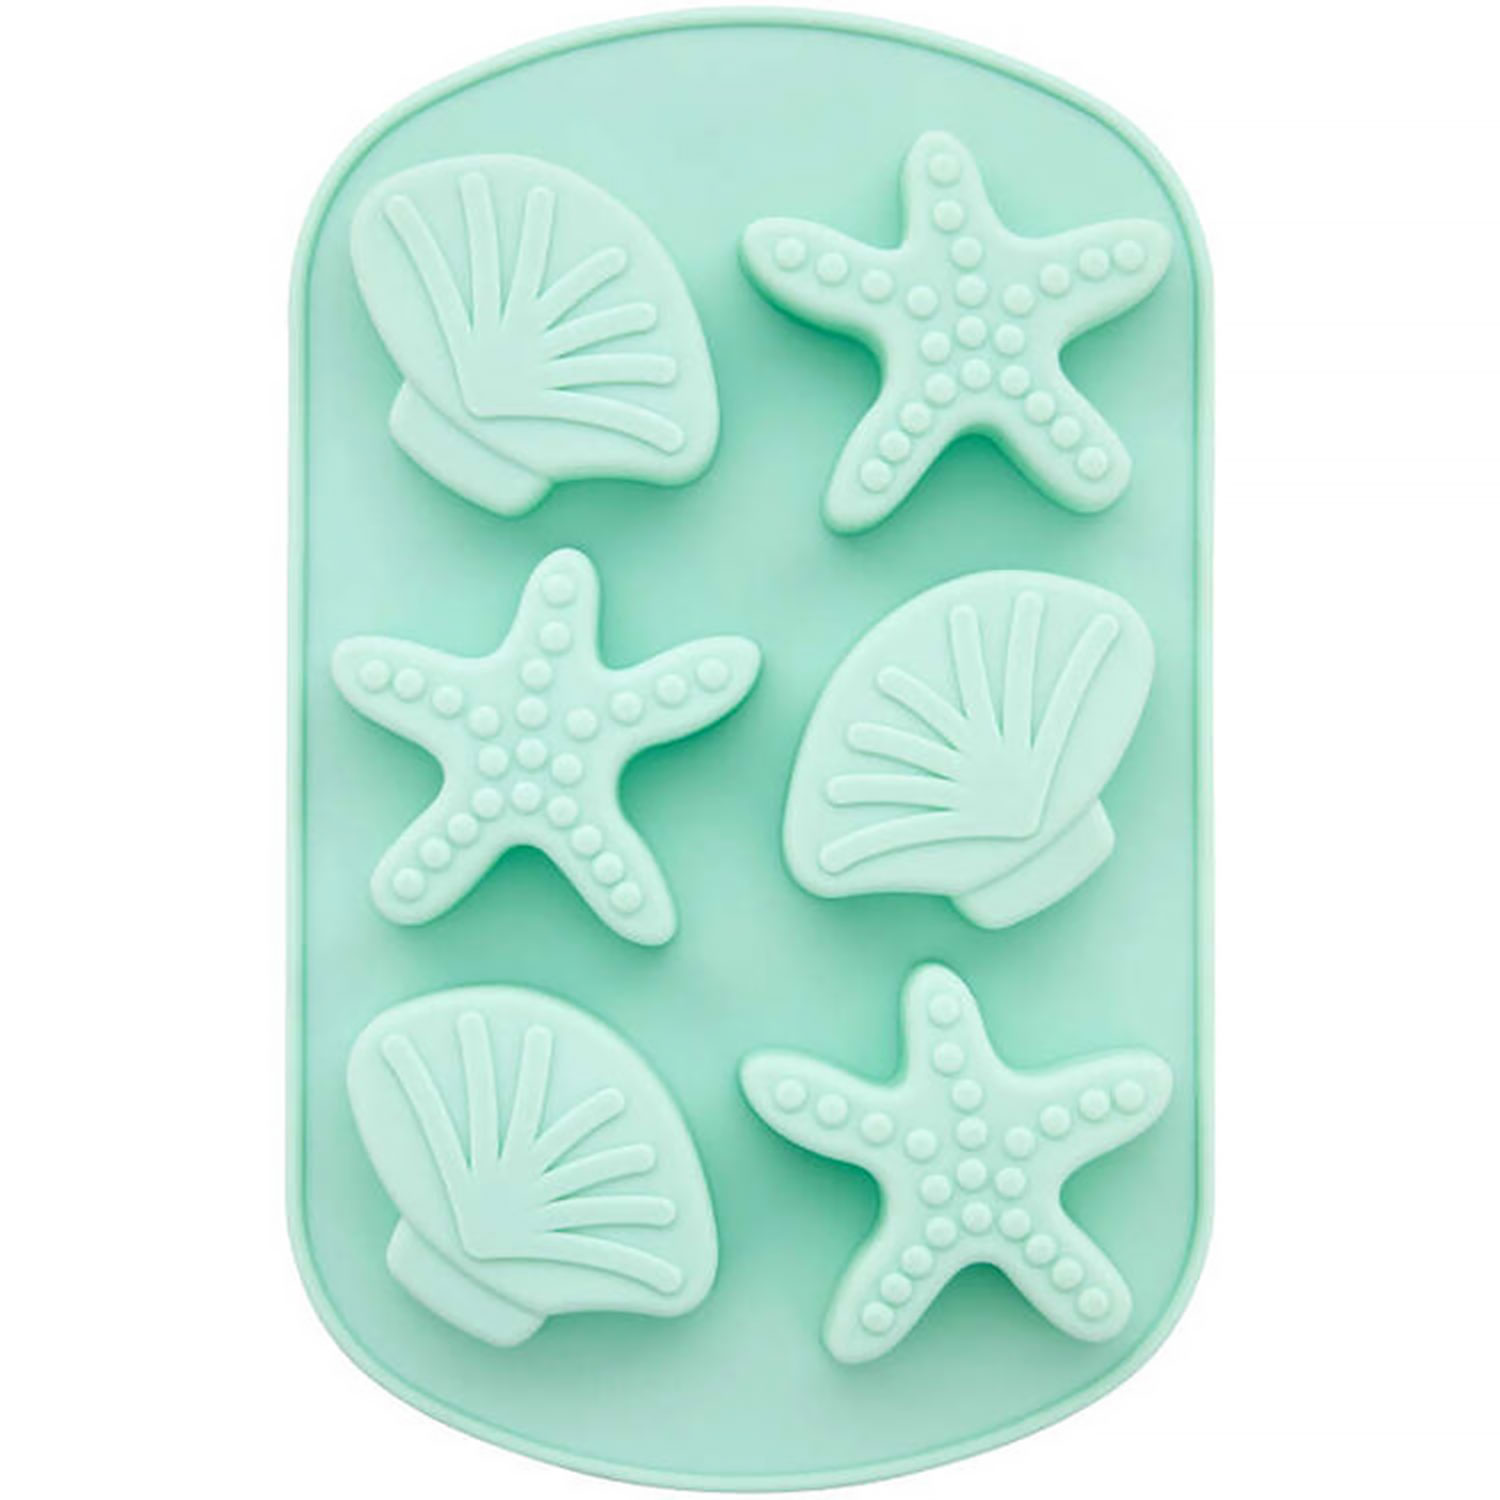 Sea Life Silicone Baking and Candy Mold